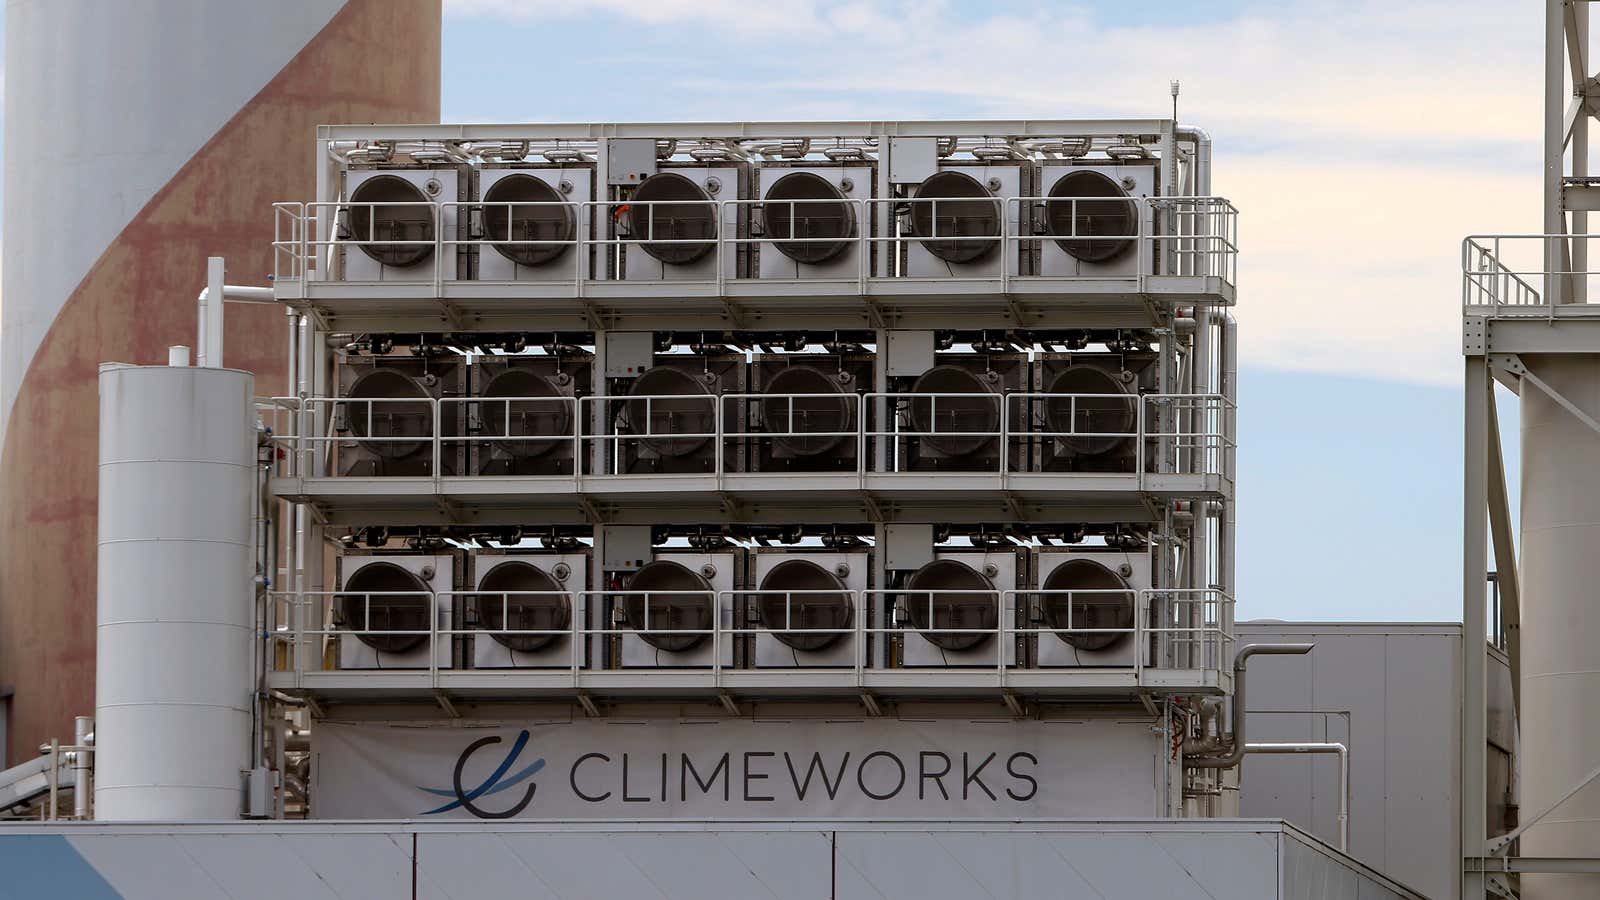 A row of carbon capture machines, which resemble air conditioning units, sits above a waste incineration plants.